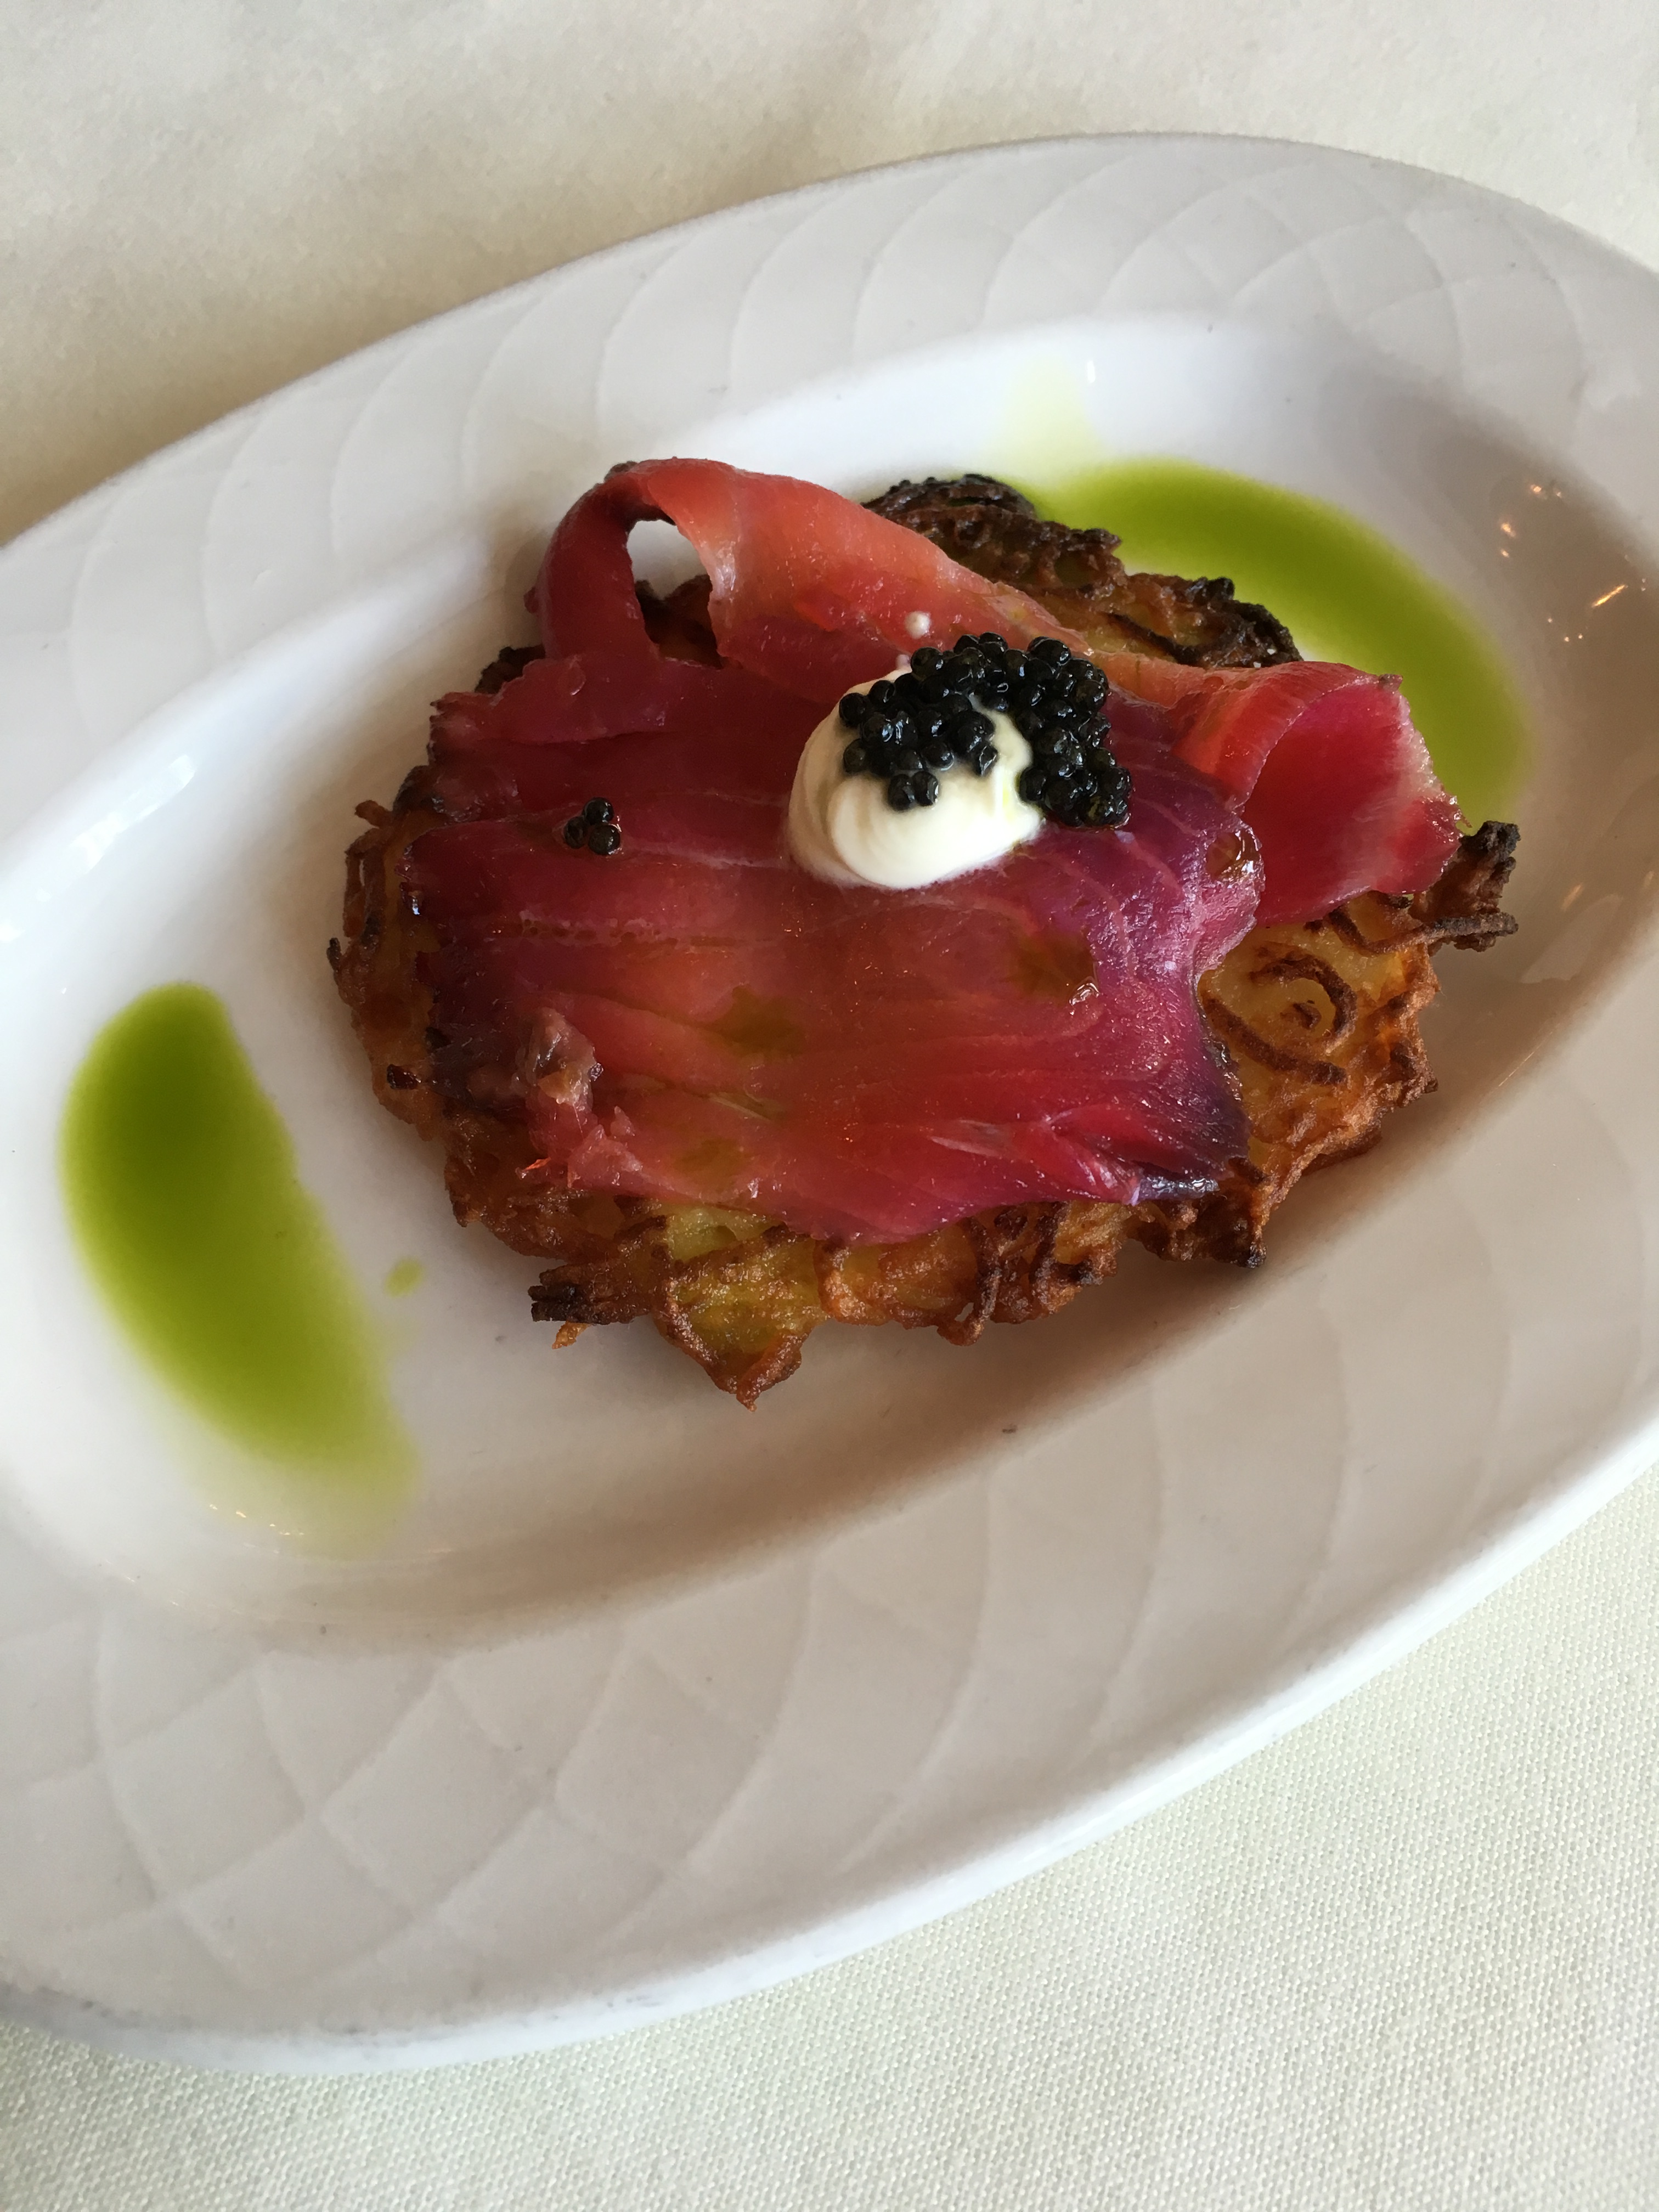 Red Beet Cured Pacific Salmon with Potato Latkes, Sour Cream and Paddlefish Caviar